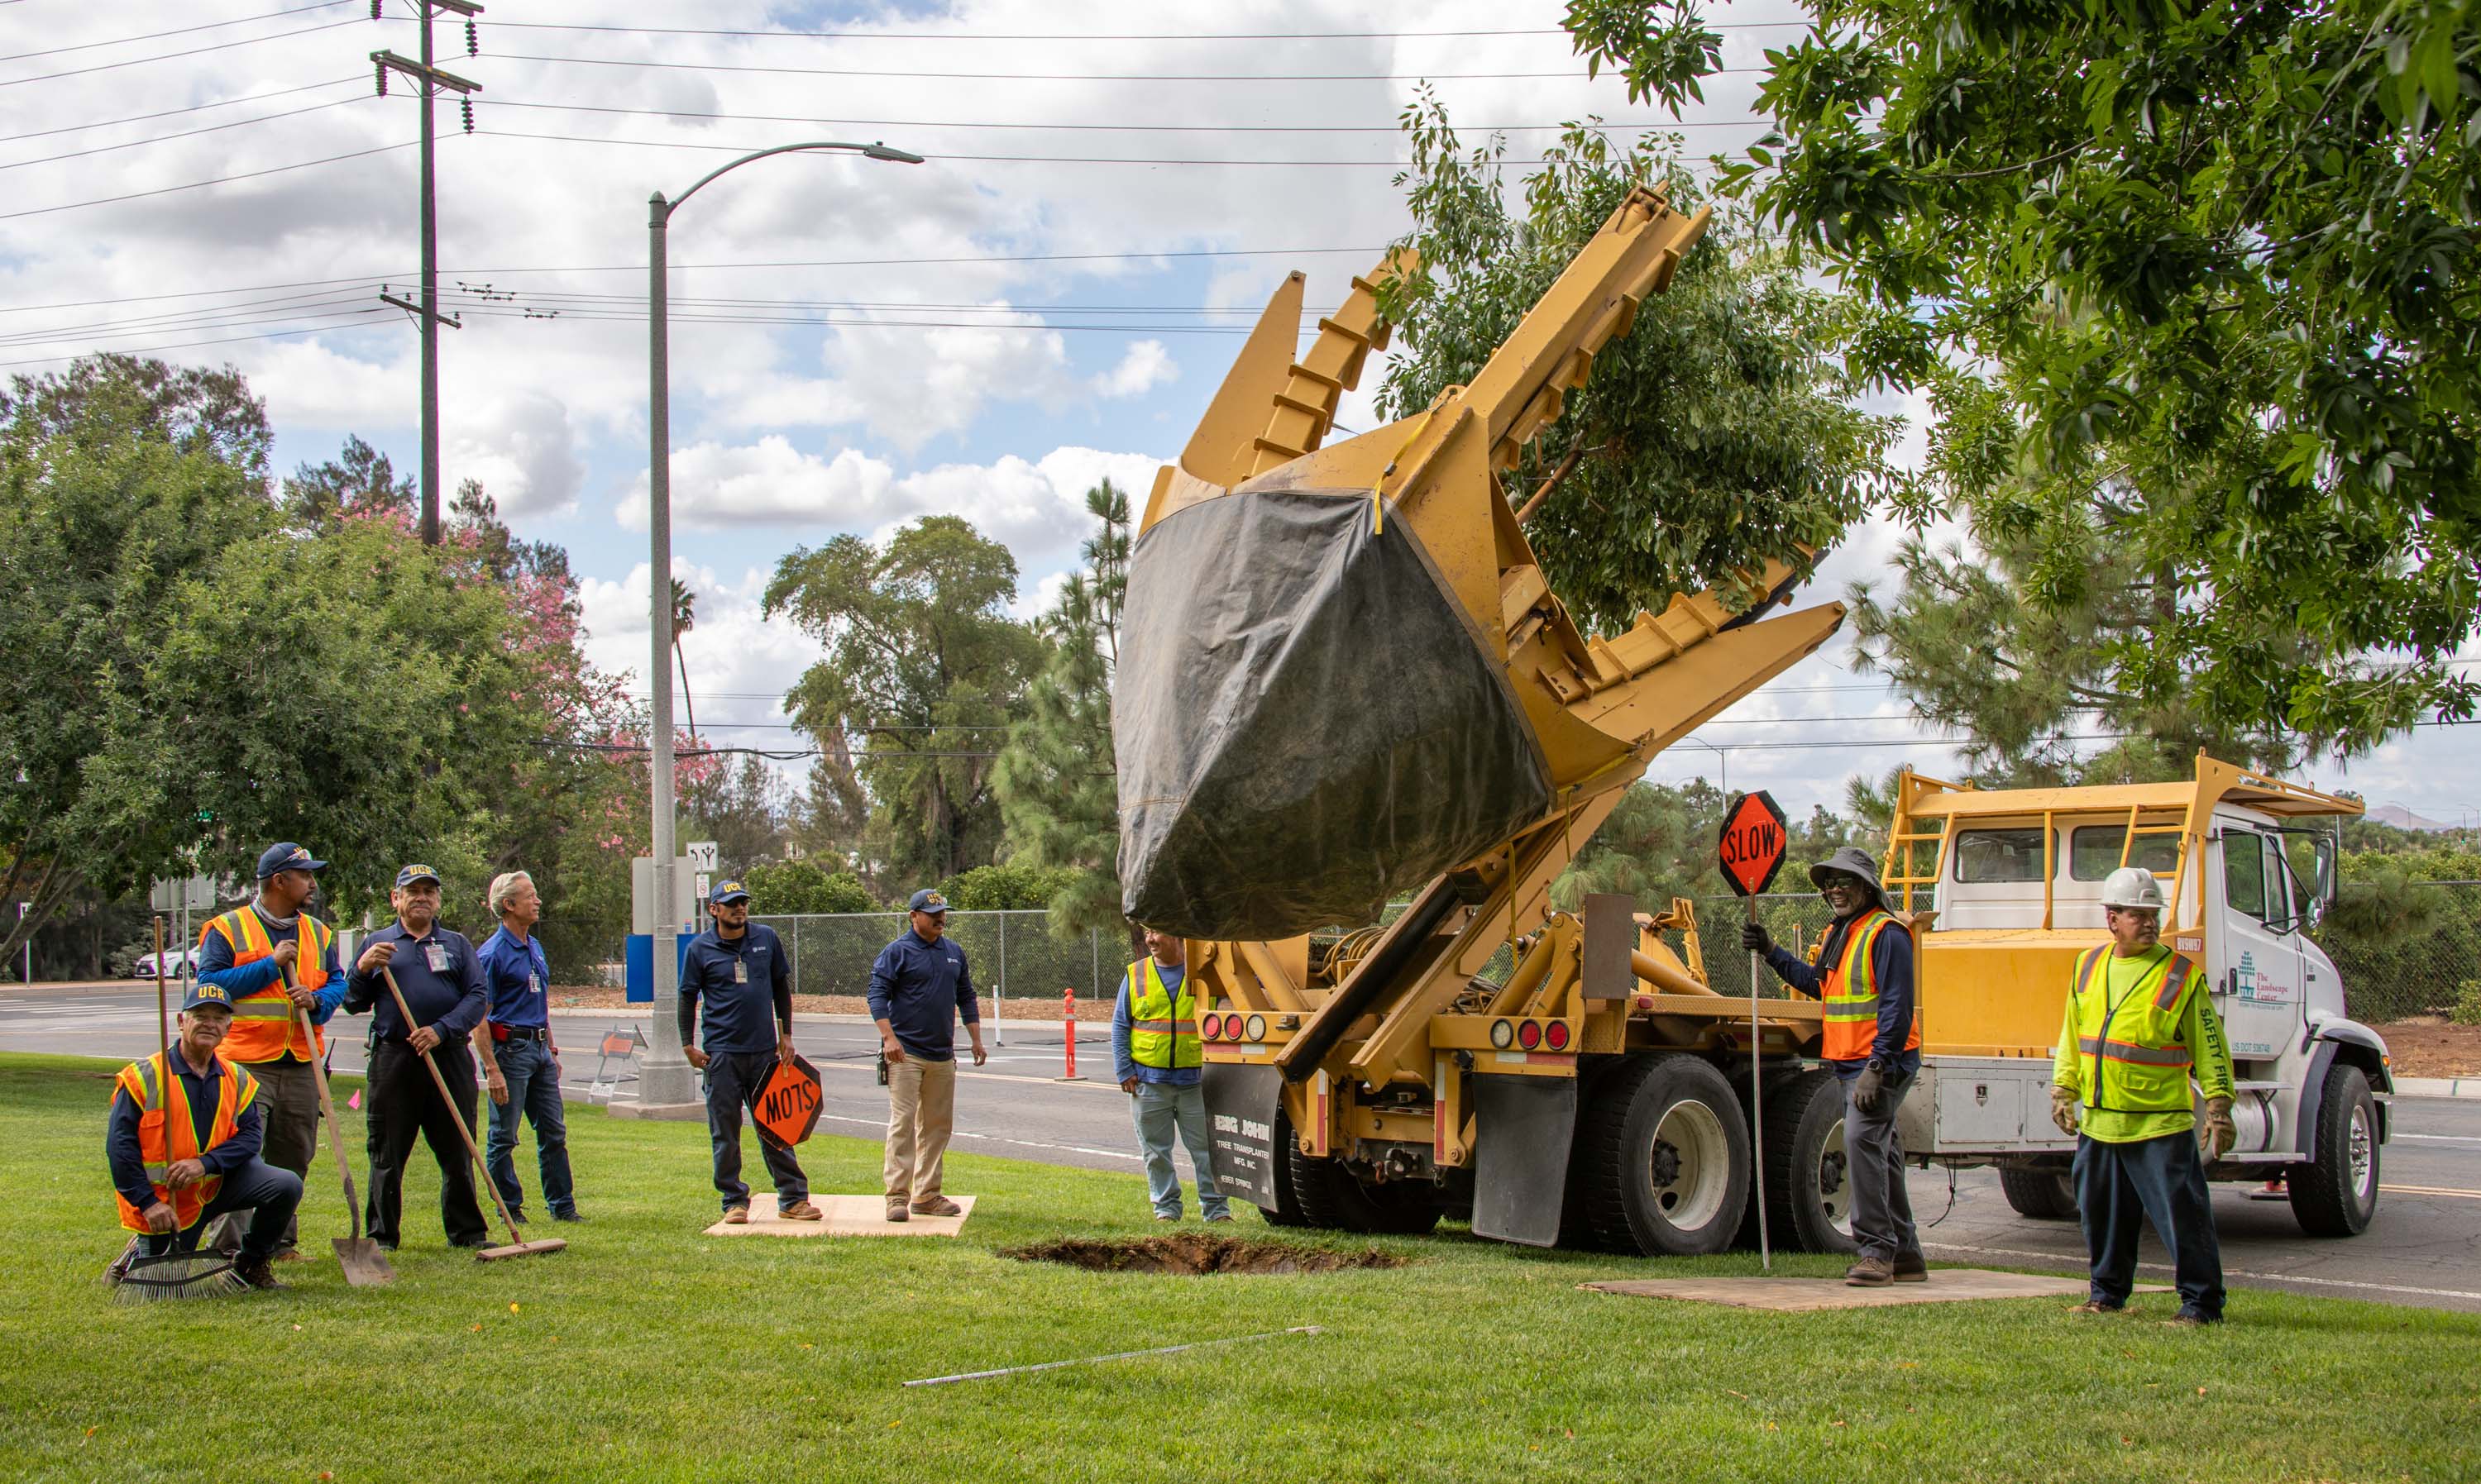 Group of landscapers in construction vests using equipment to lower a tree into the ground next to a parking lot